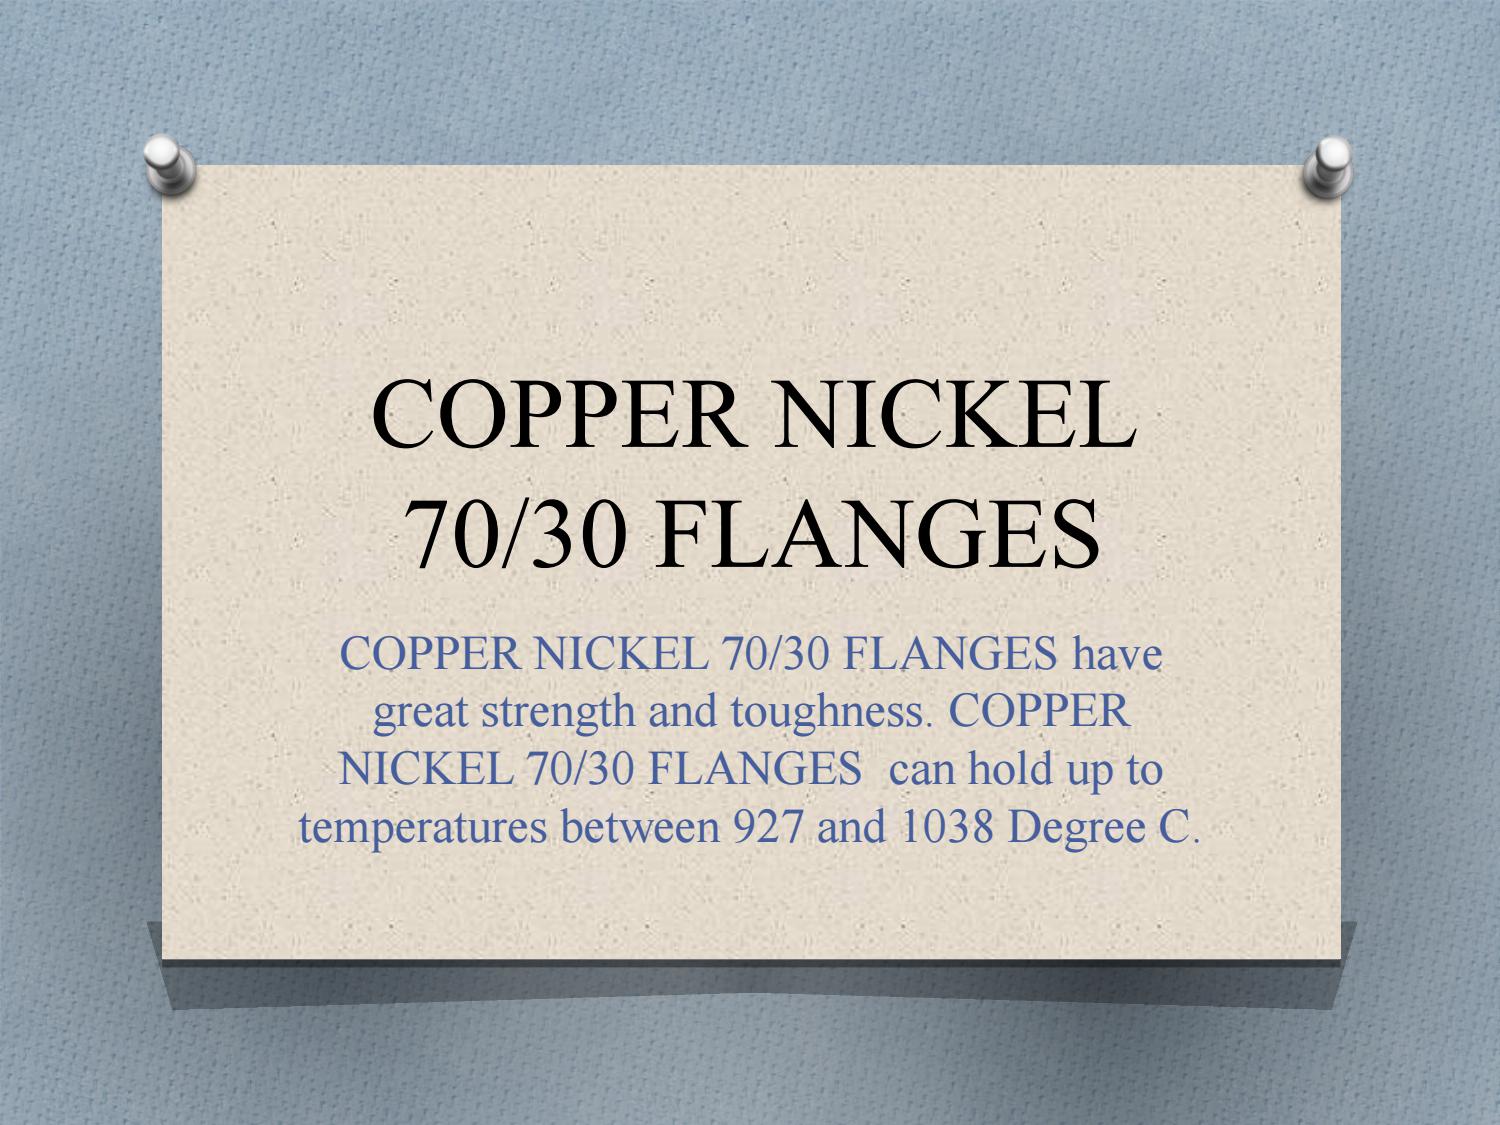 COPPER NICKEL
70/30 FLANGES

COPPER NICKEL 70/30 FLANGES have
great strength and toughness. COPPER
NICKEL 70/30 FLANGES can hold up to
temperatures between 927 and 1038 Degree C.